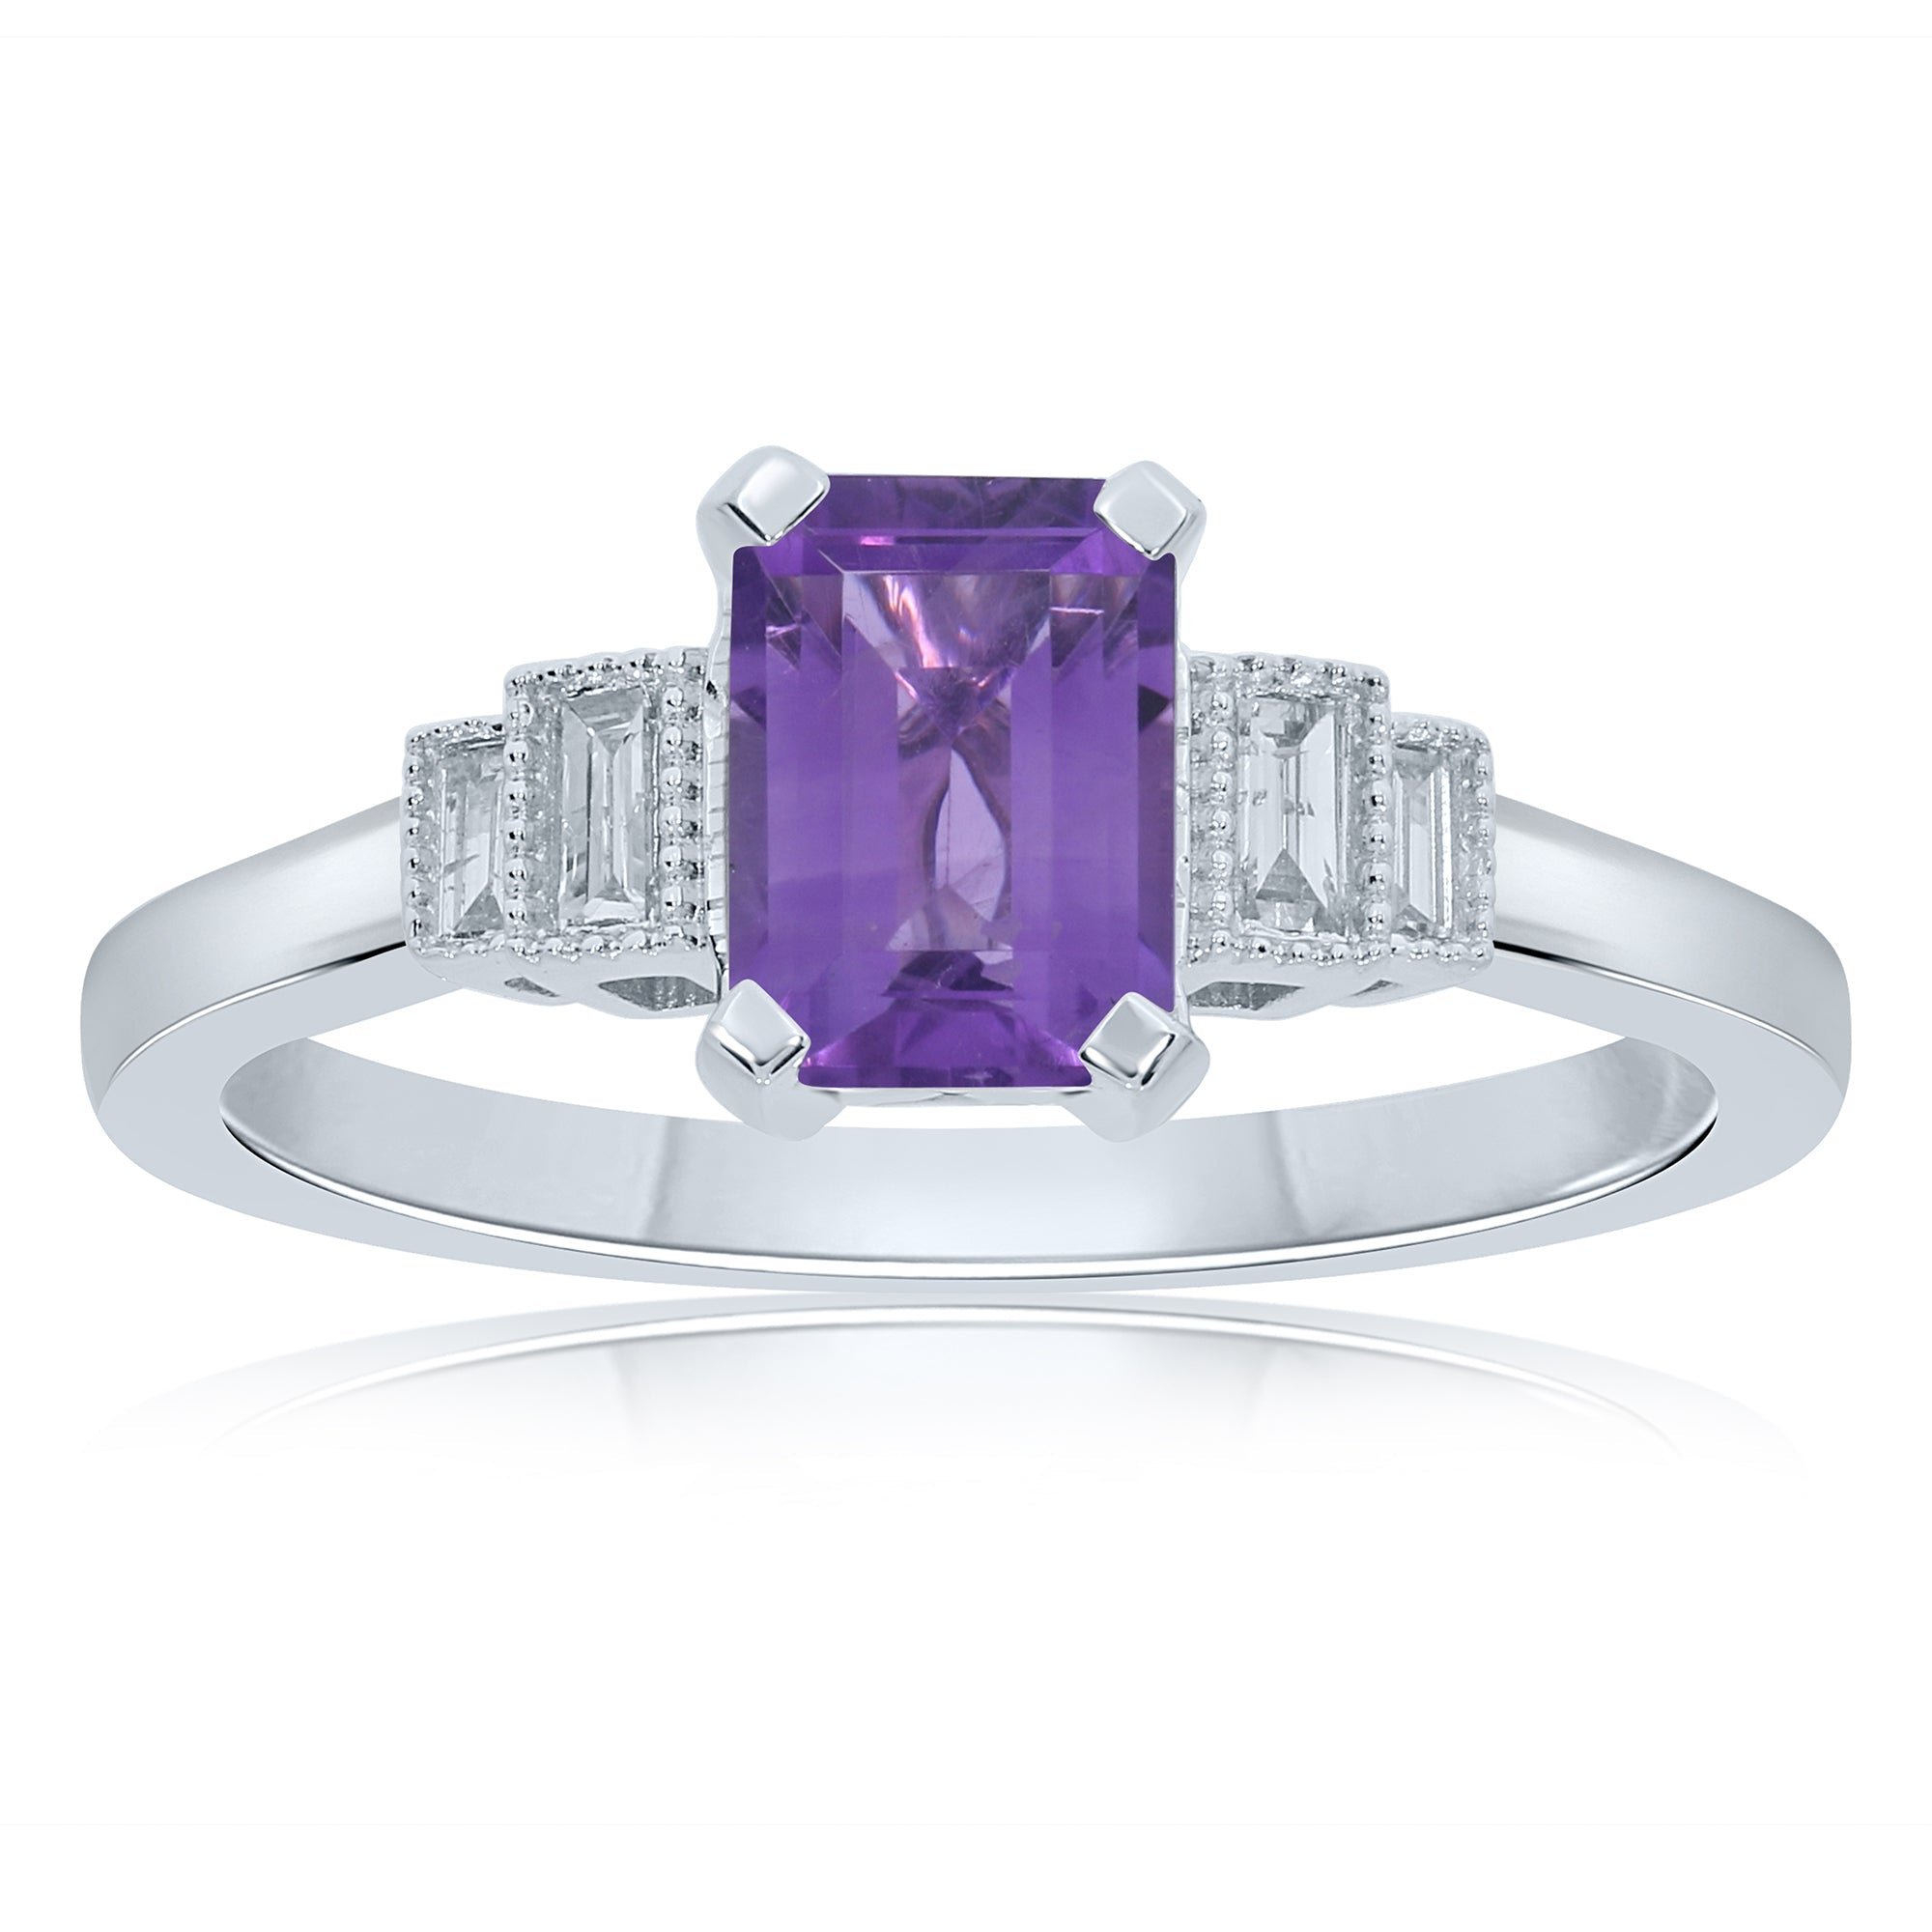 9ct white gold 7x5mm octagon cut amethyst & stepped diamond shoulders ring 0.11ct